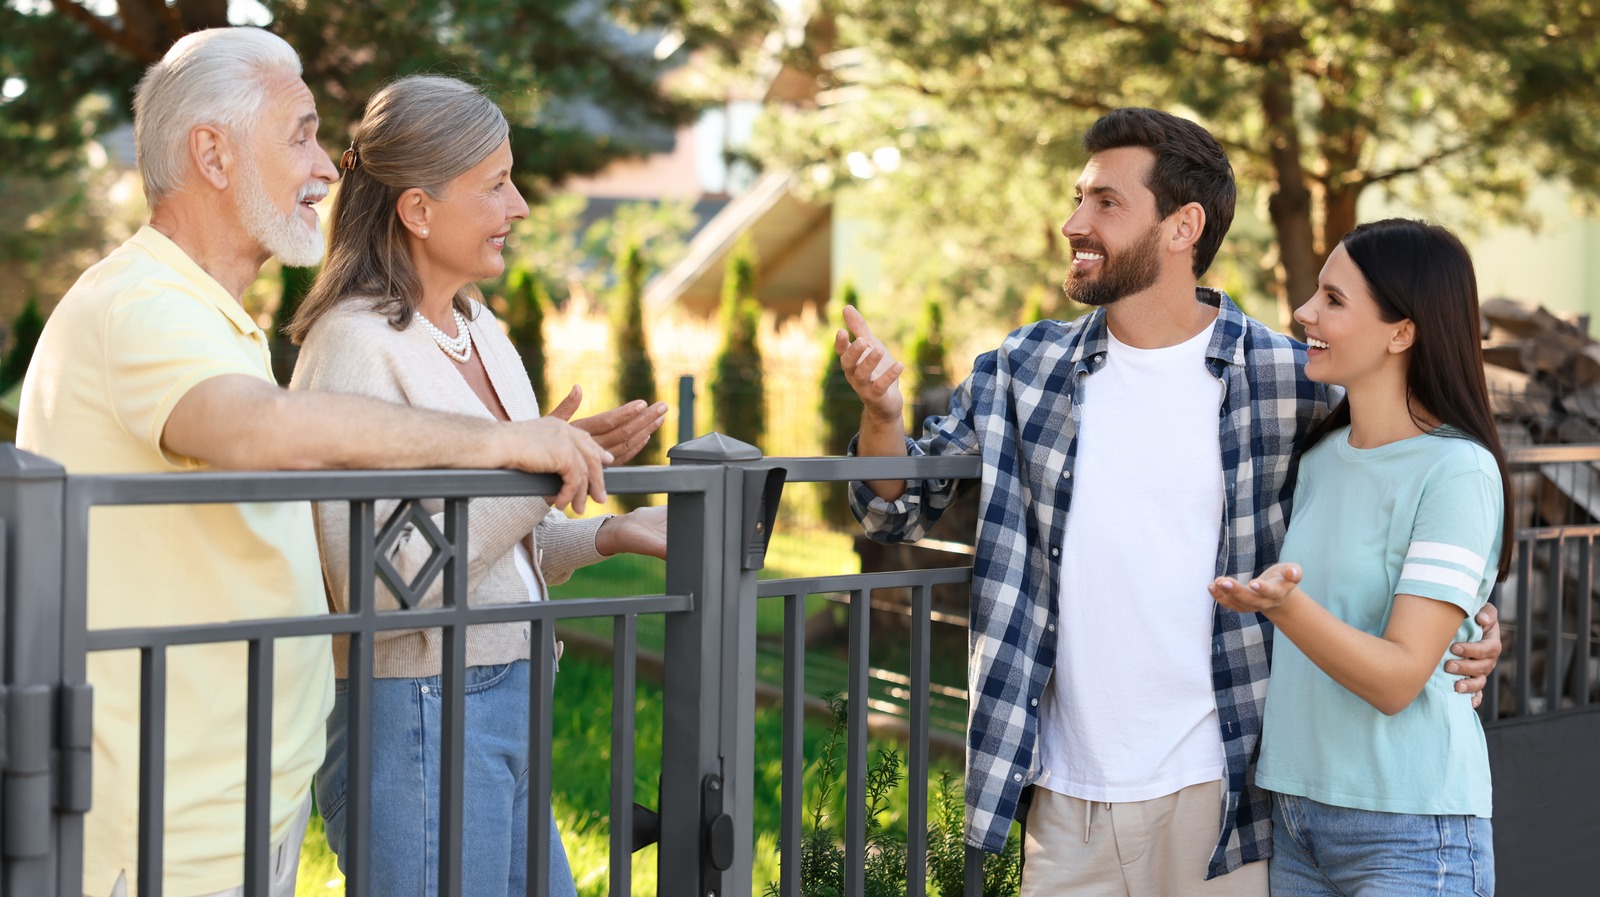 Home Buying Tip: Talk to the Neighbors Before Buying